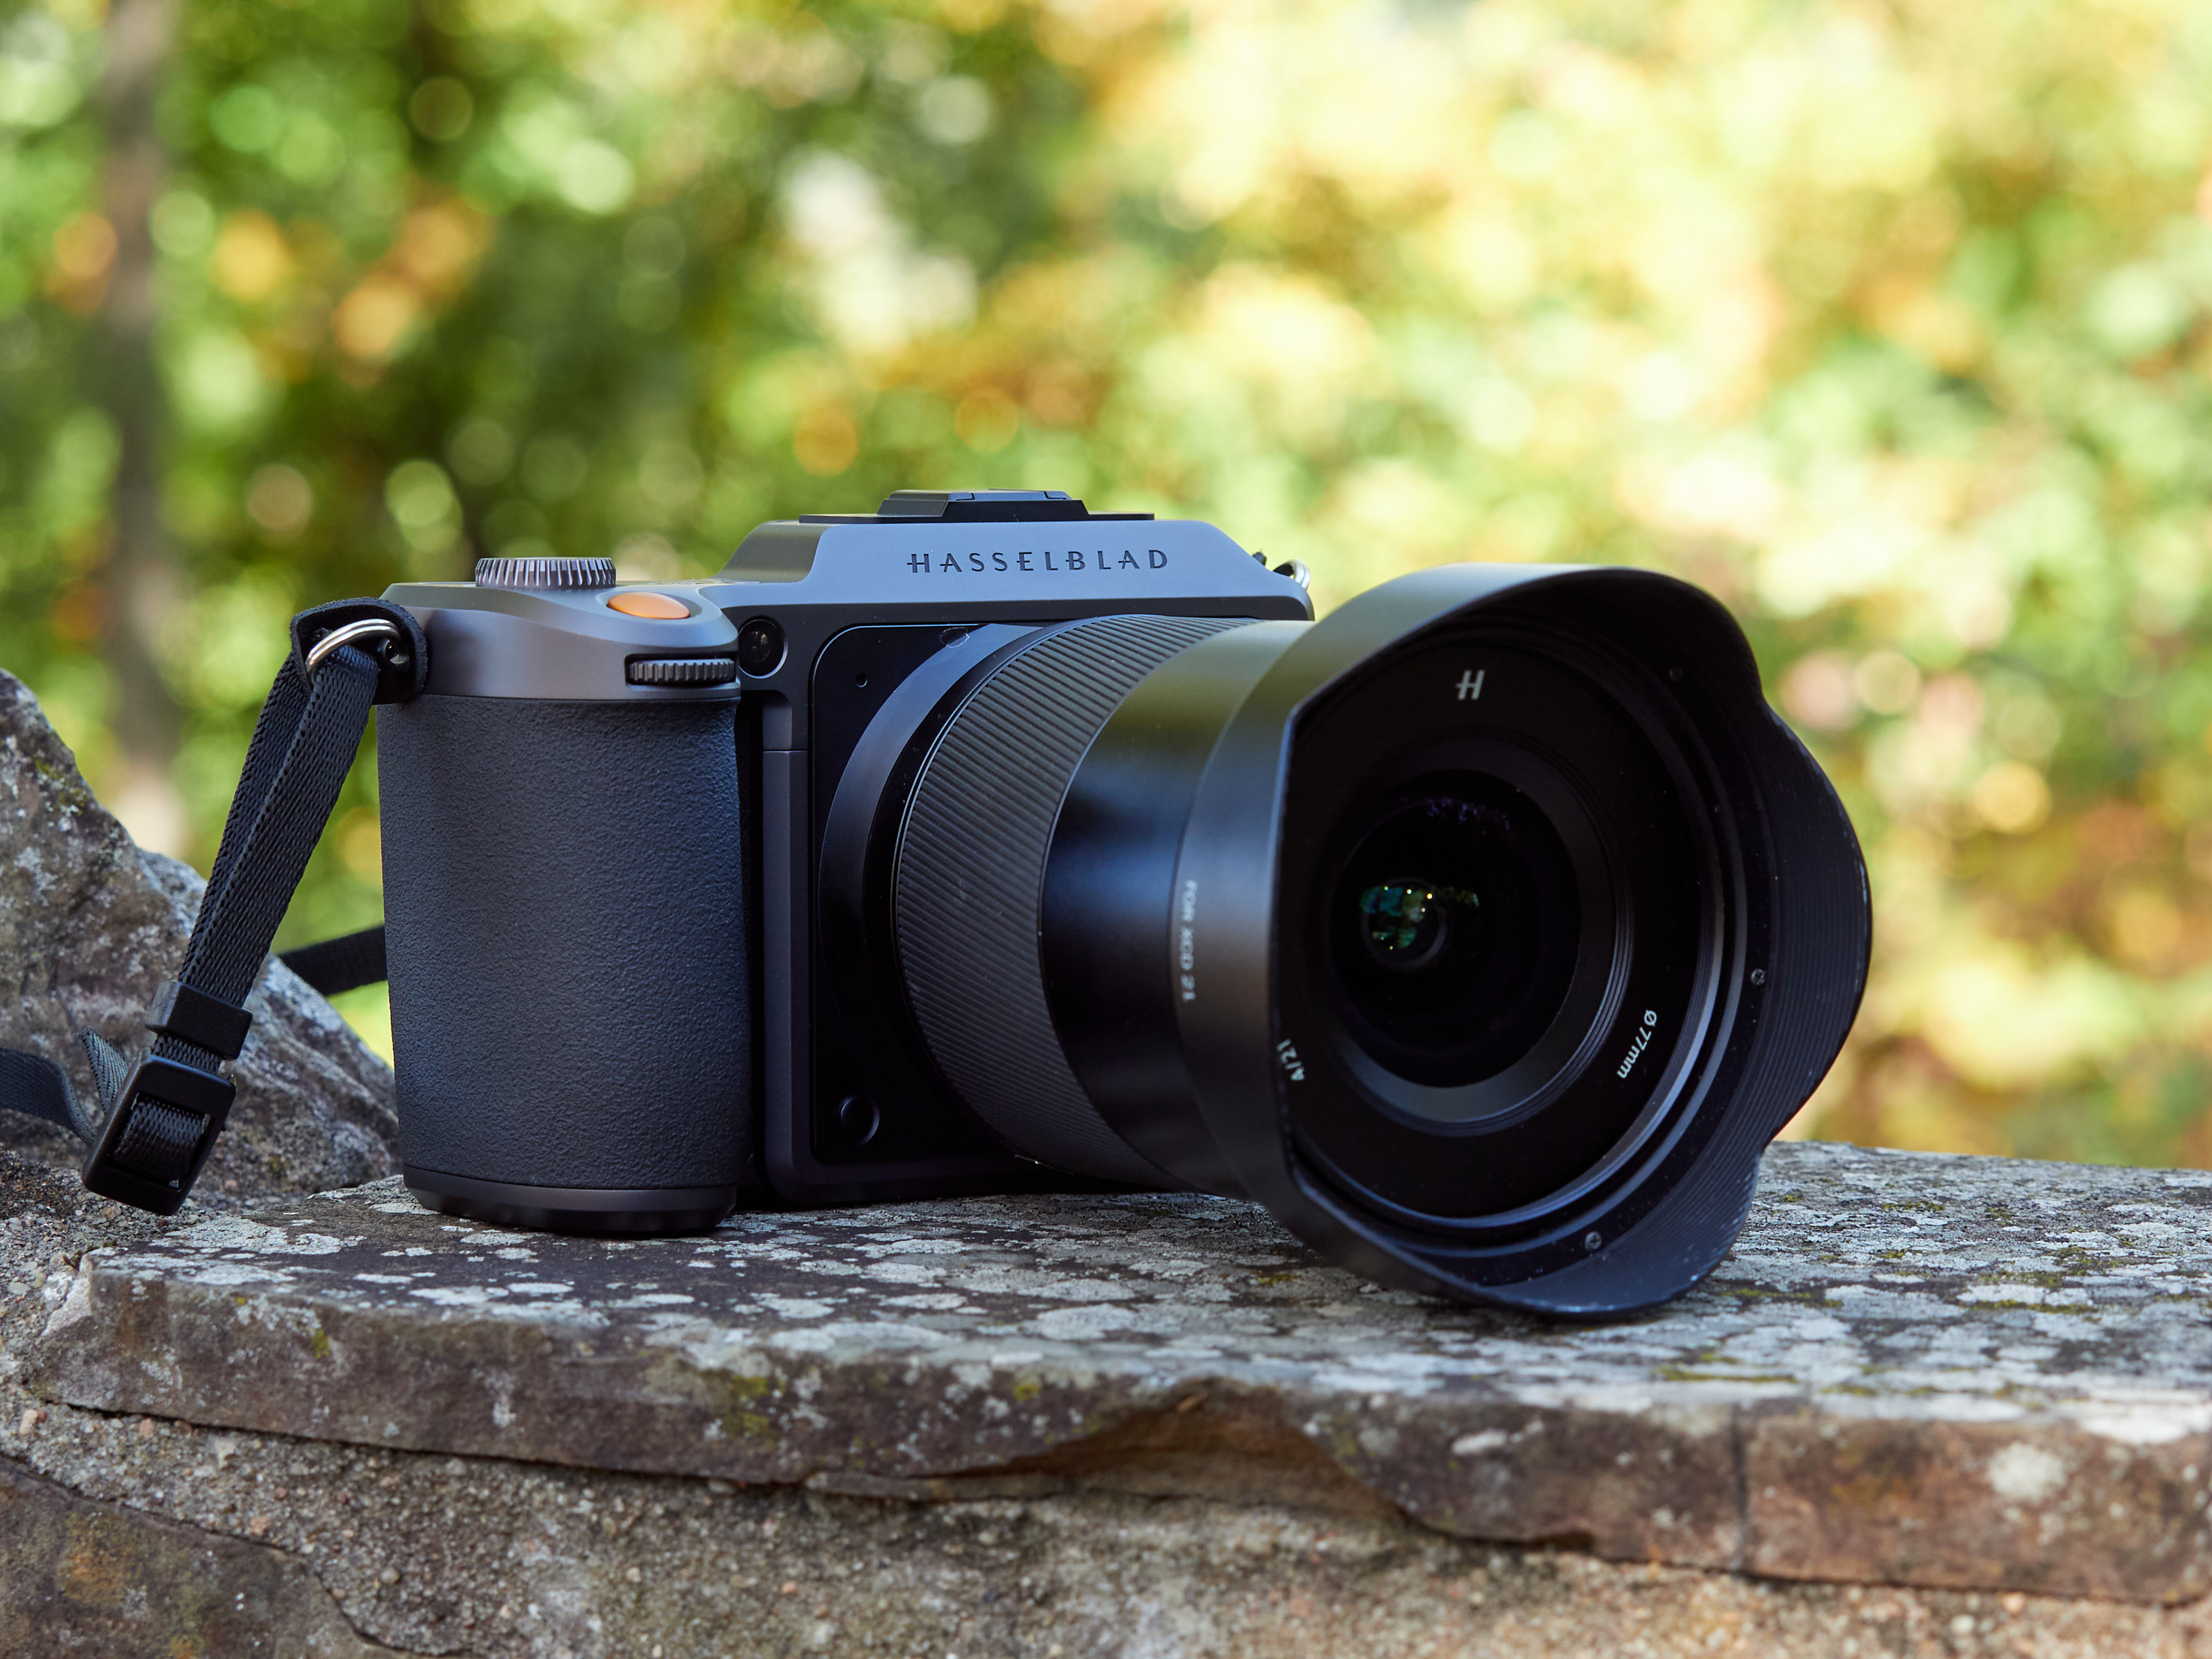 Review: The Hasselblad X1D II (A Beautiful, But Very Frustrating Camera)